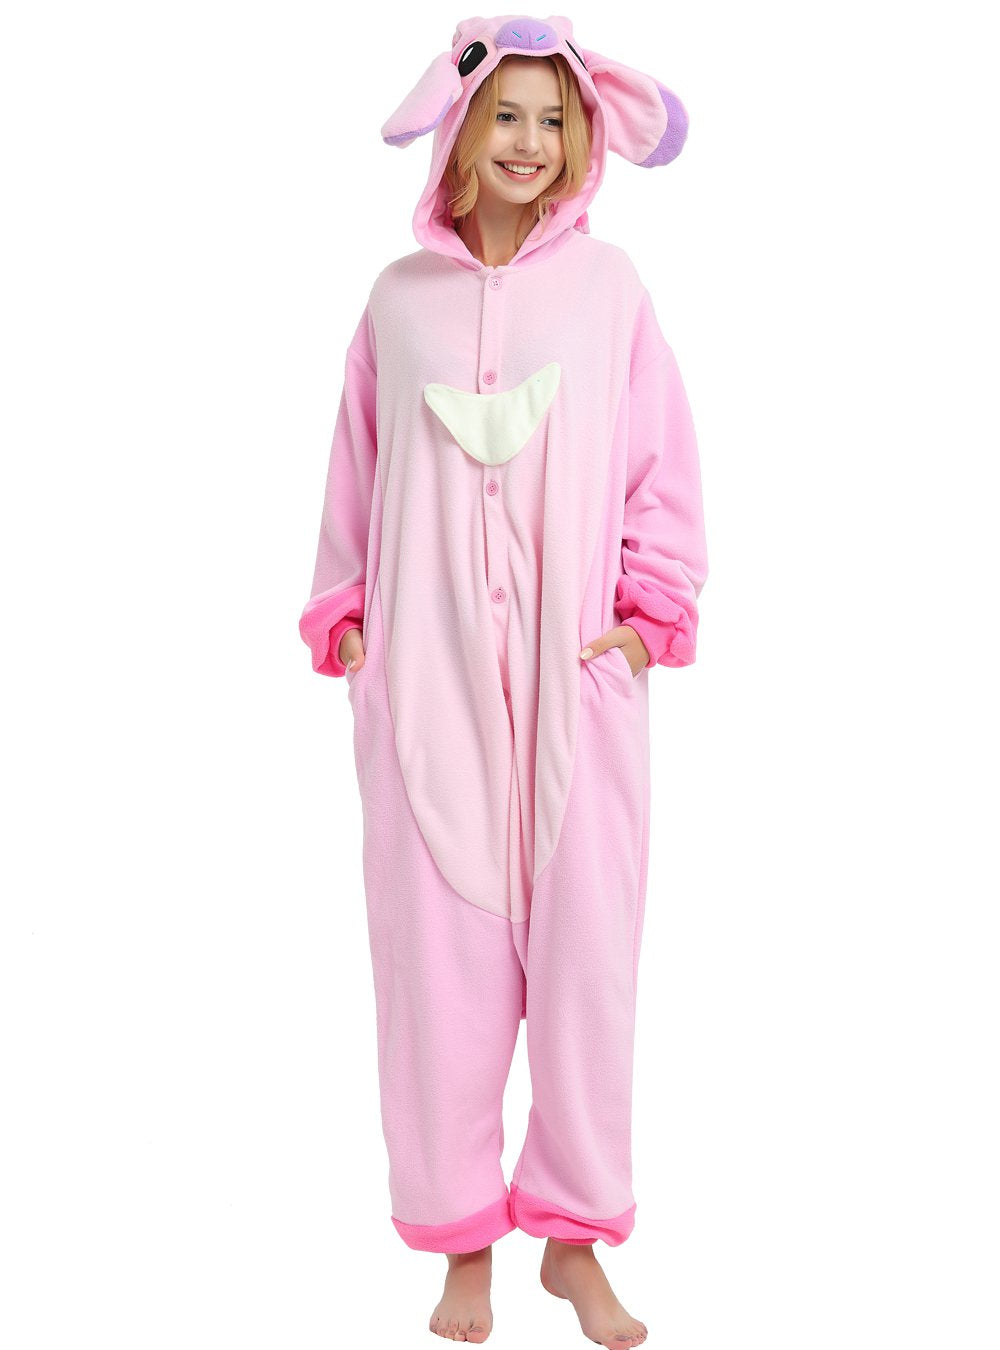 Lilo & Stitch Angel Onesie For Adults and Teenagers